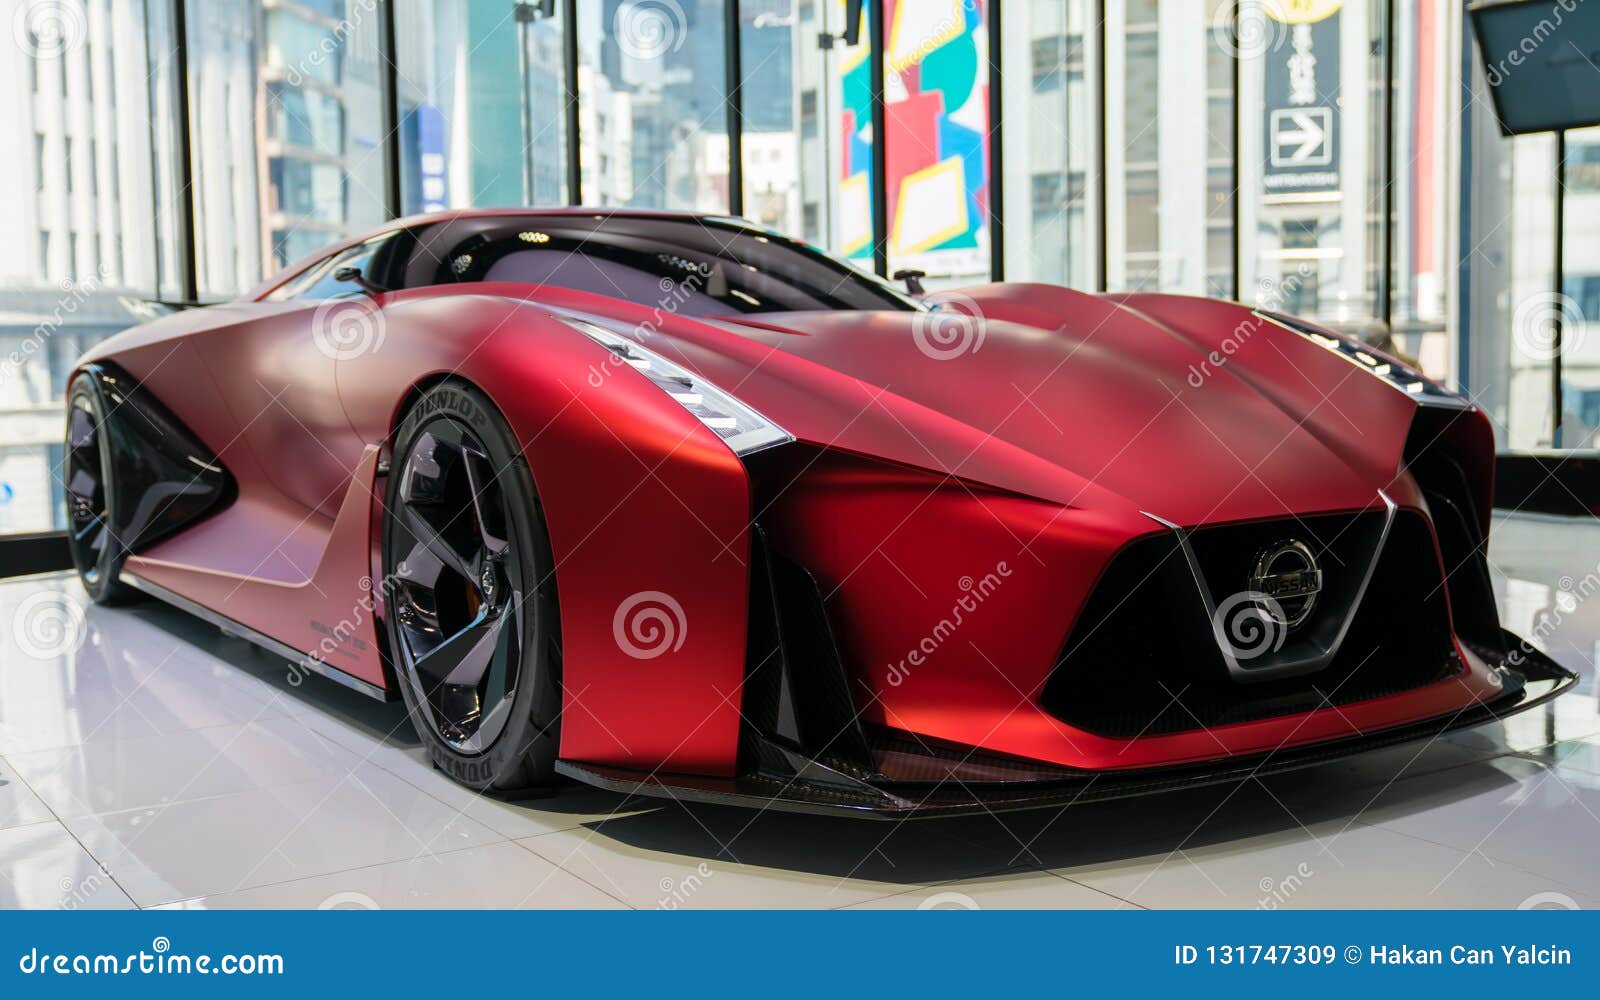 The Nissan Concept Vision Gran Turismo Vehicle On Display At Nissan Crossing Showroom In The Editorial Stock Image Image Of Fast Future